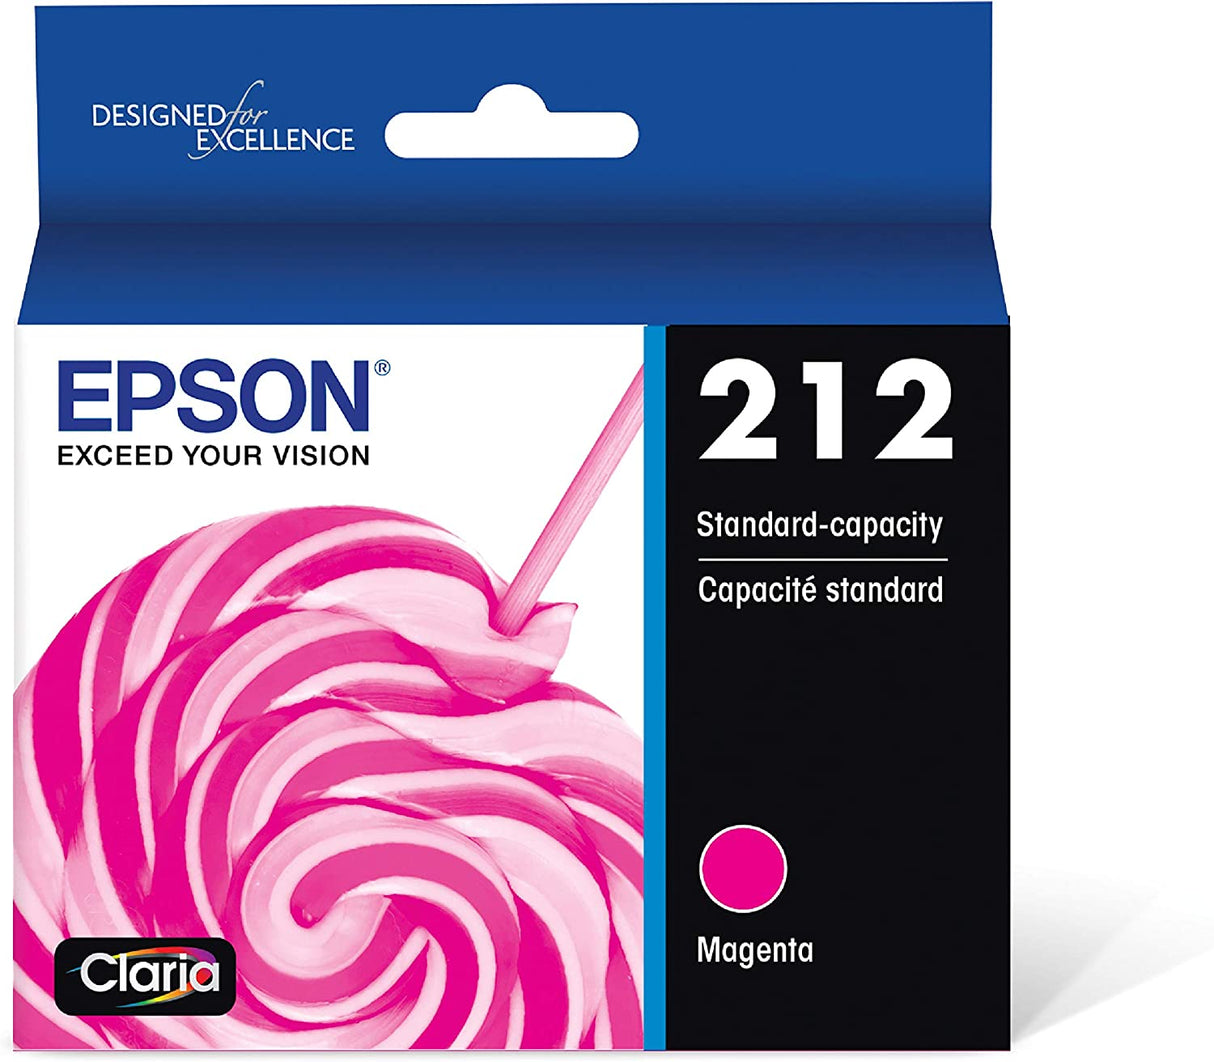 EPSON T212 Claria -Ink Standard Capacity Black Dual -Cartridge Pack (T212120-D2) for Select Epson Expression and Workforce Printers &amp; T212 Claria -Ink Standard Capacity Magenta -Cartridge (T212320-S) Claria-Ink Black Dual + Claria-Ink Magenta